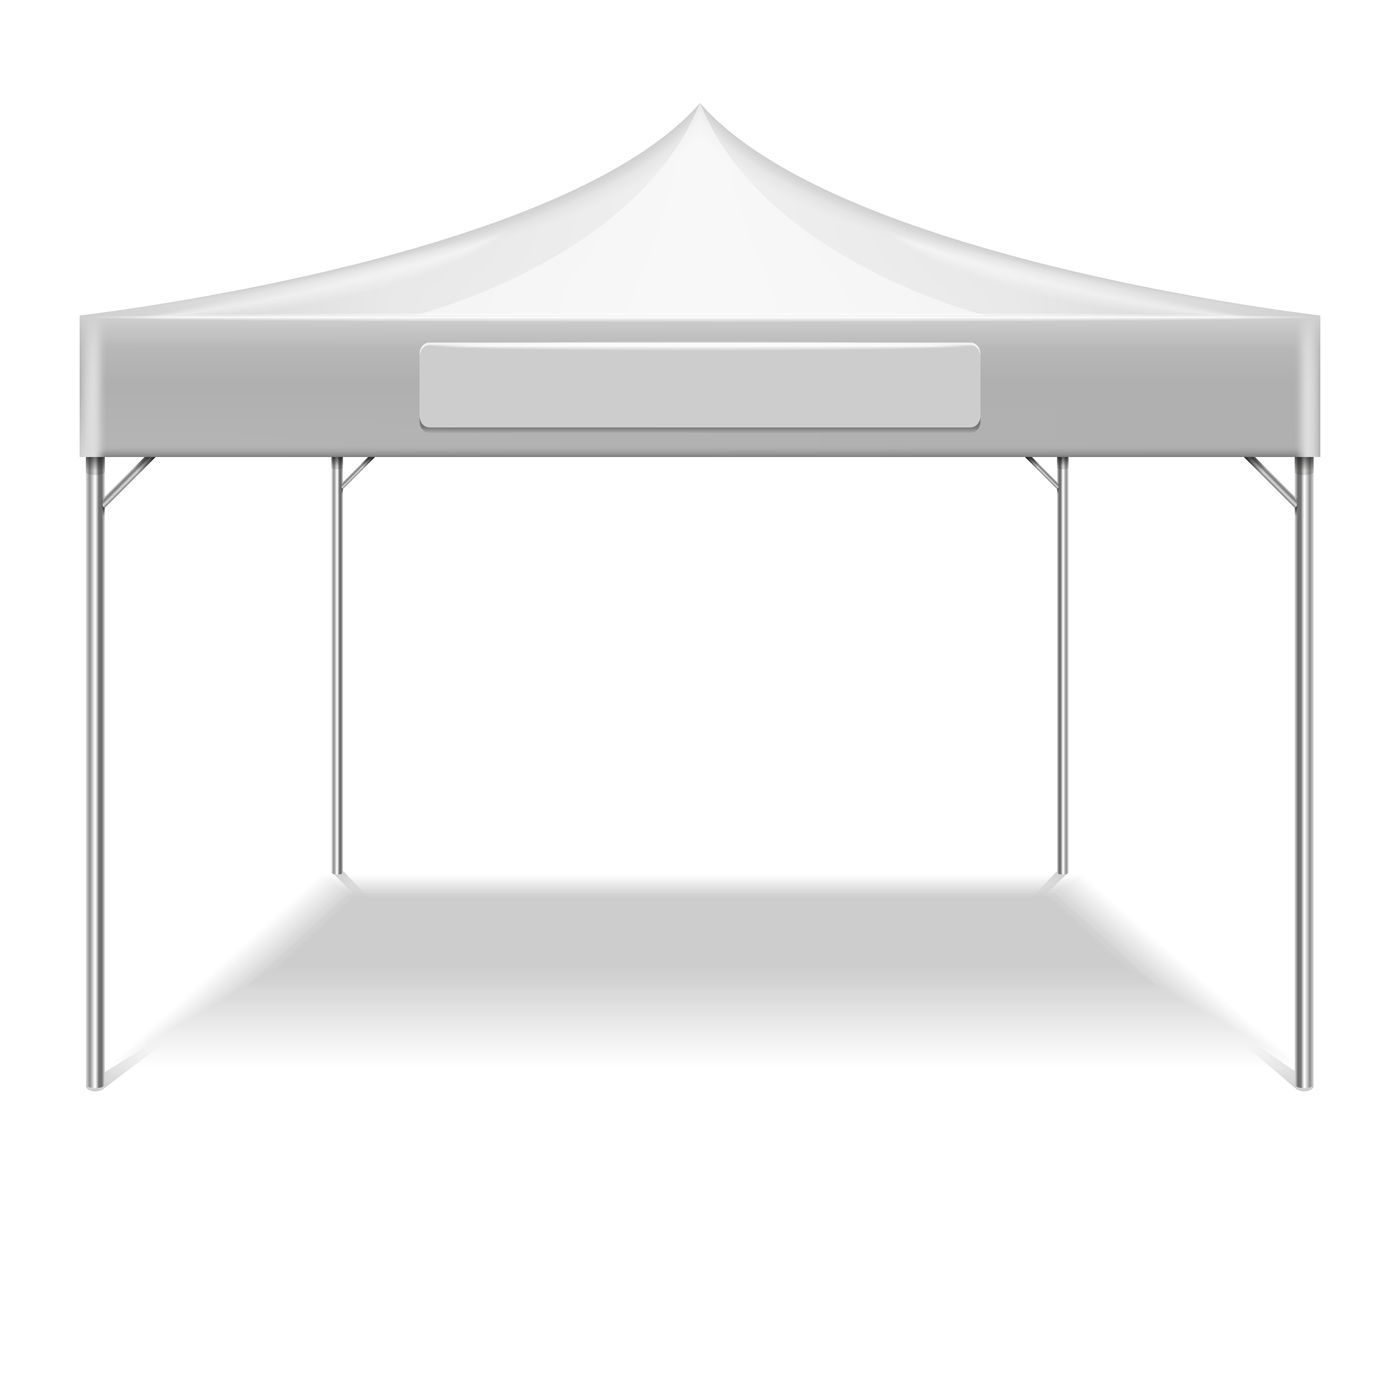 Realistic white outdoor folding party tent vector mockup By Microvector | TheHungryJPEG.com